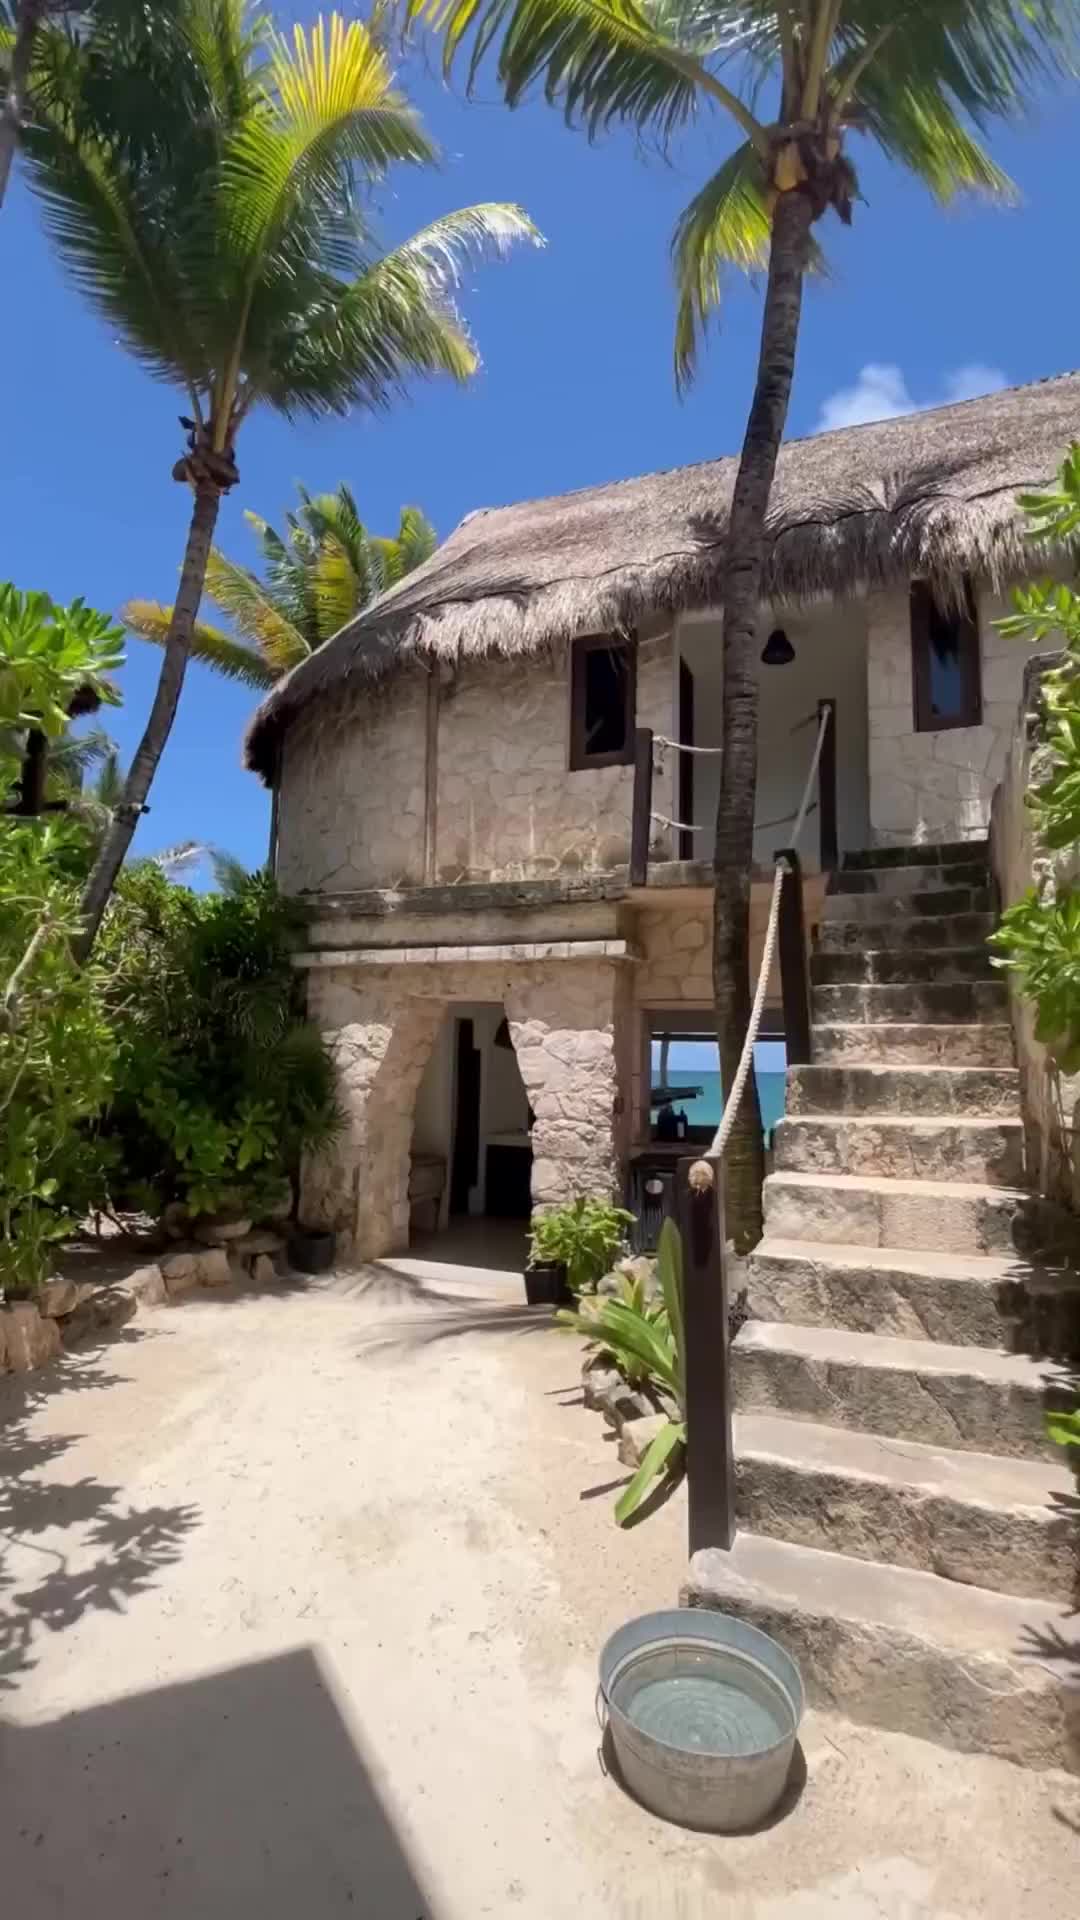 Discover Tranquility at NEST Tulum, Mexico